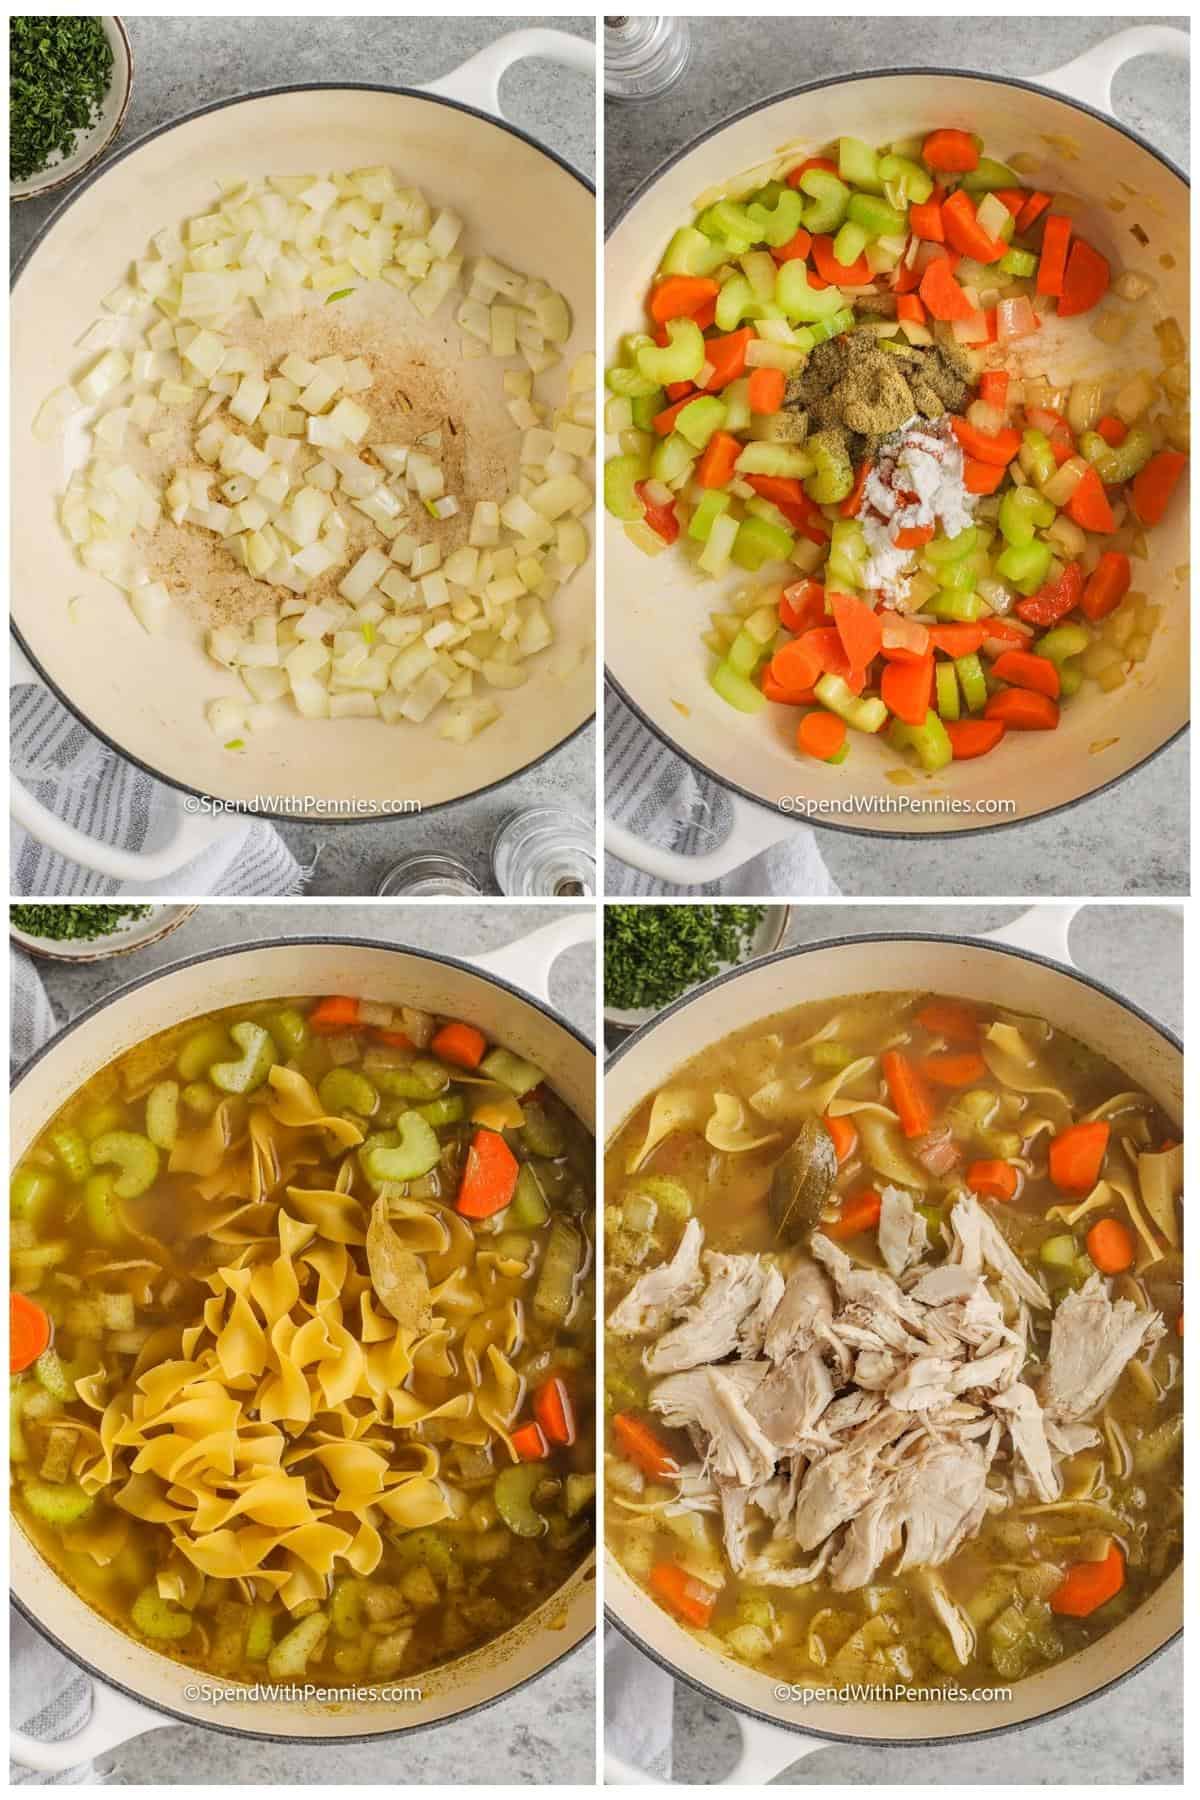 process of adding ingredients to pot to make Homemade Chicken Noodle Soup